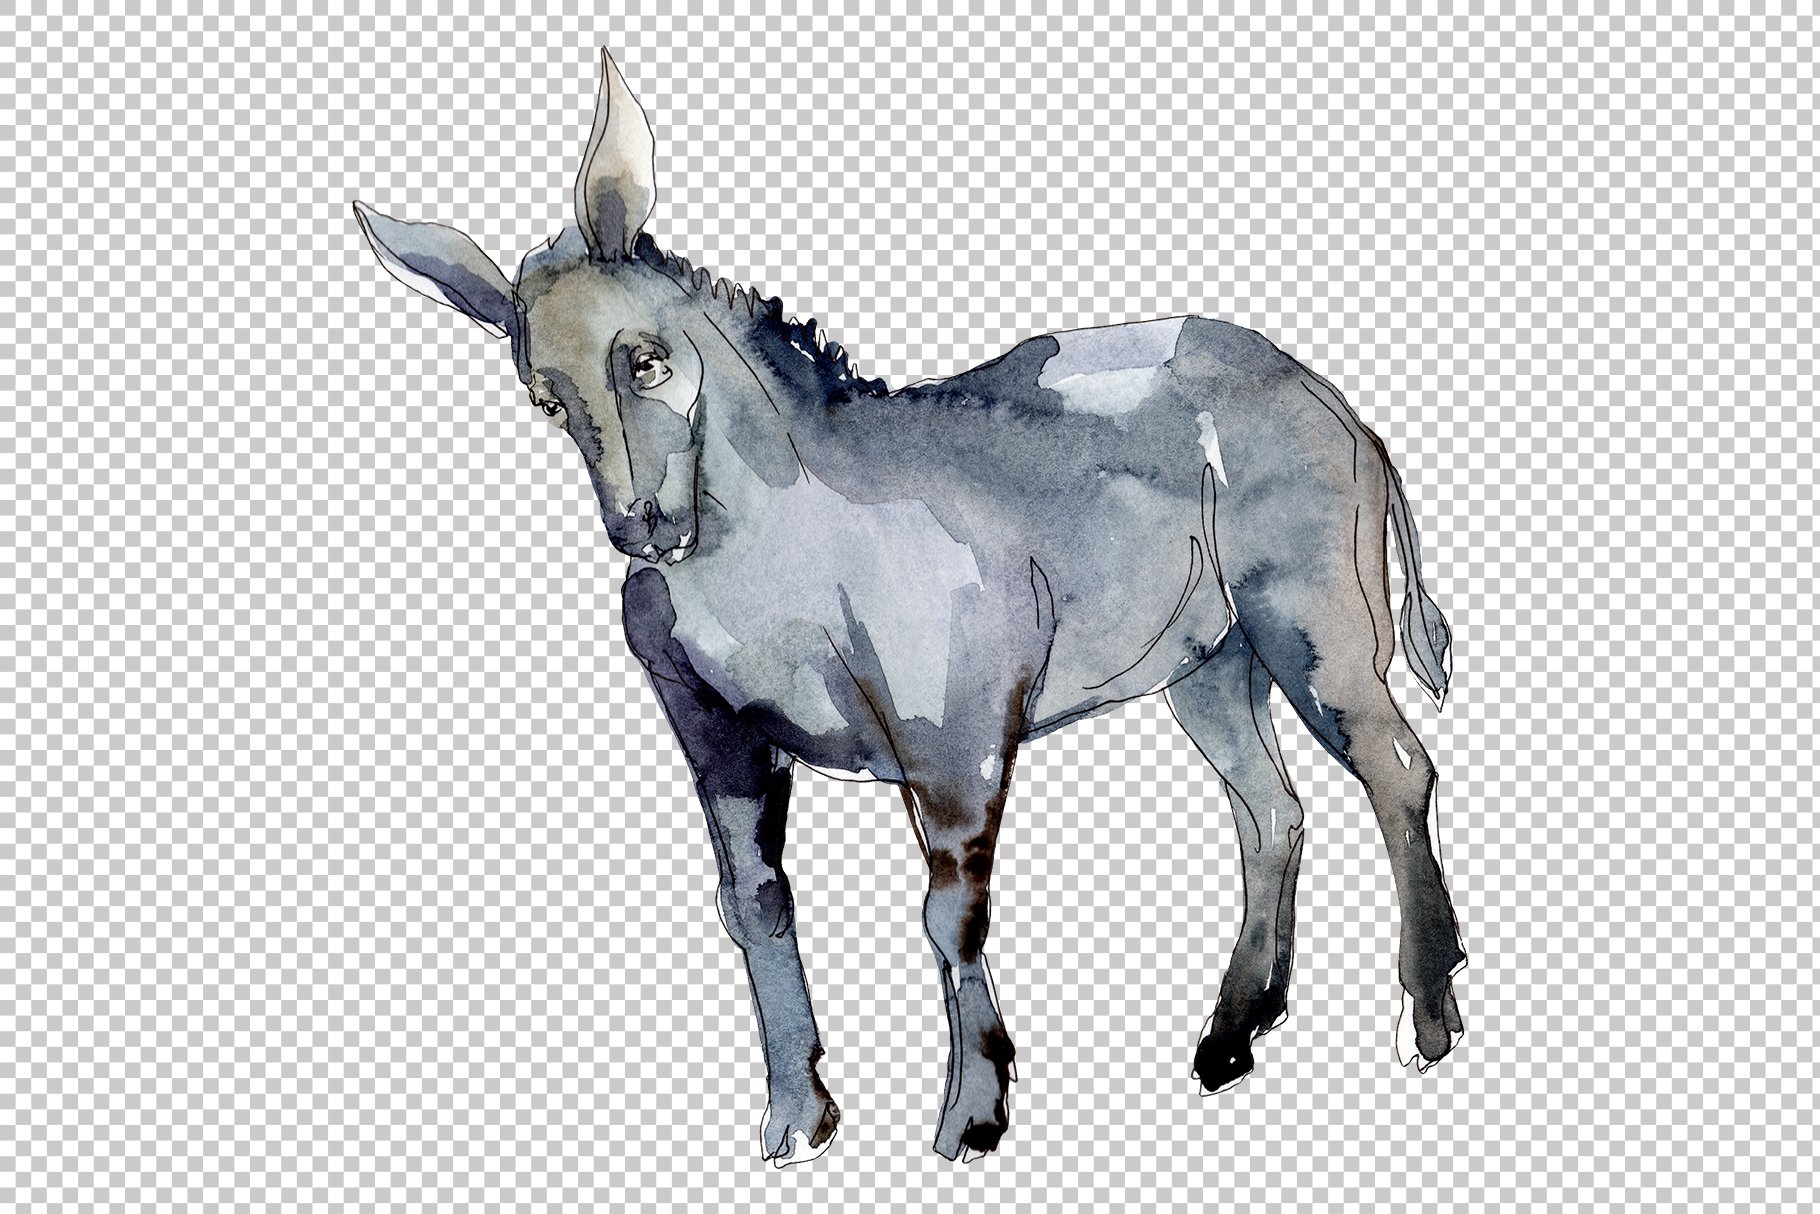 Active grey watercolor horse is ready for your illustration.